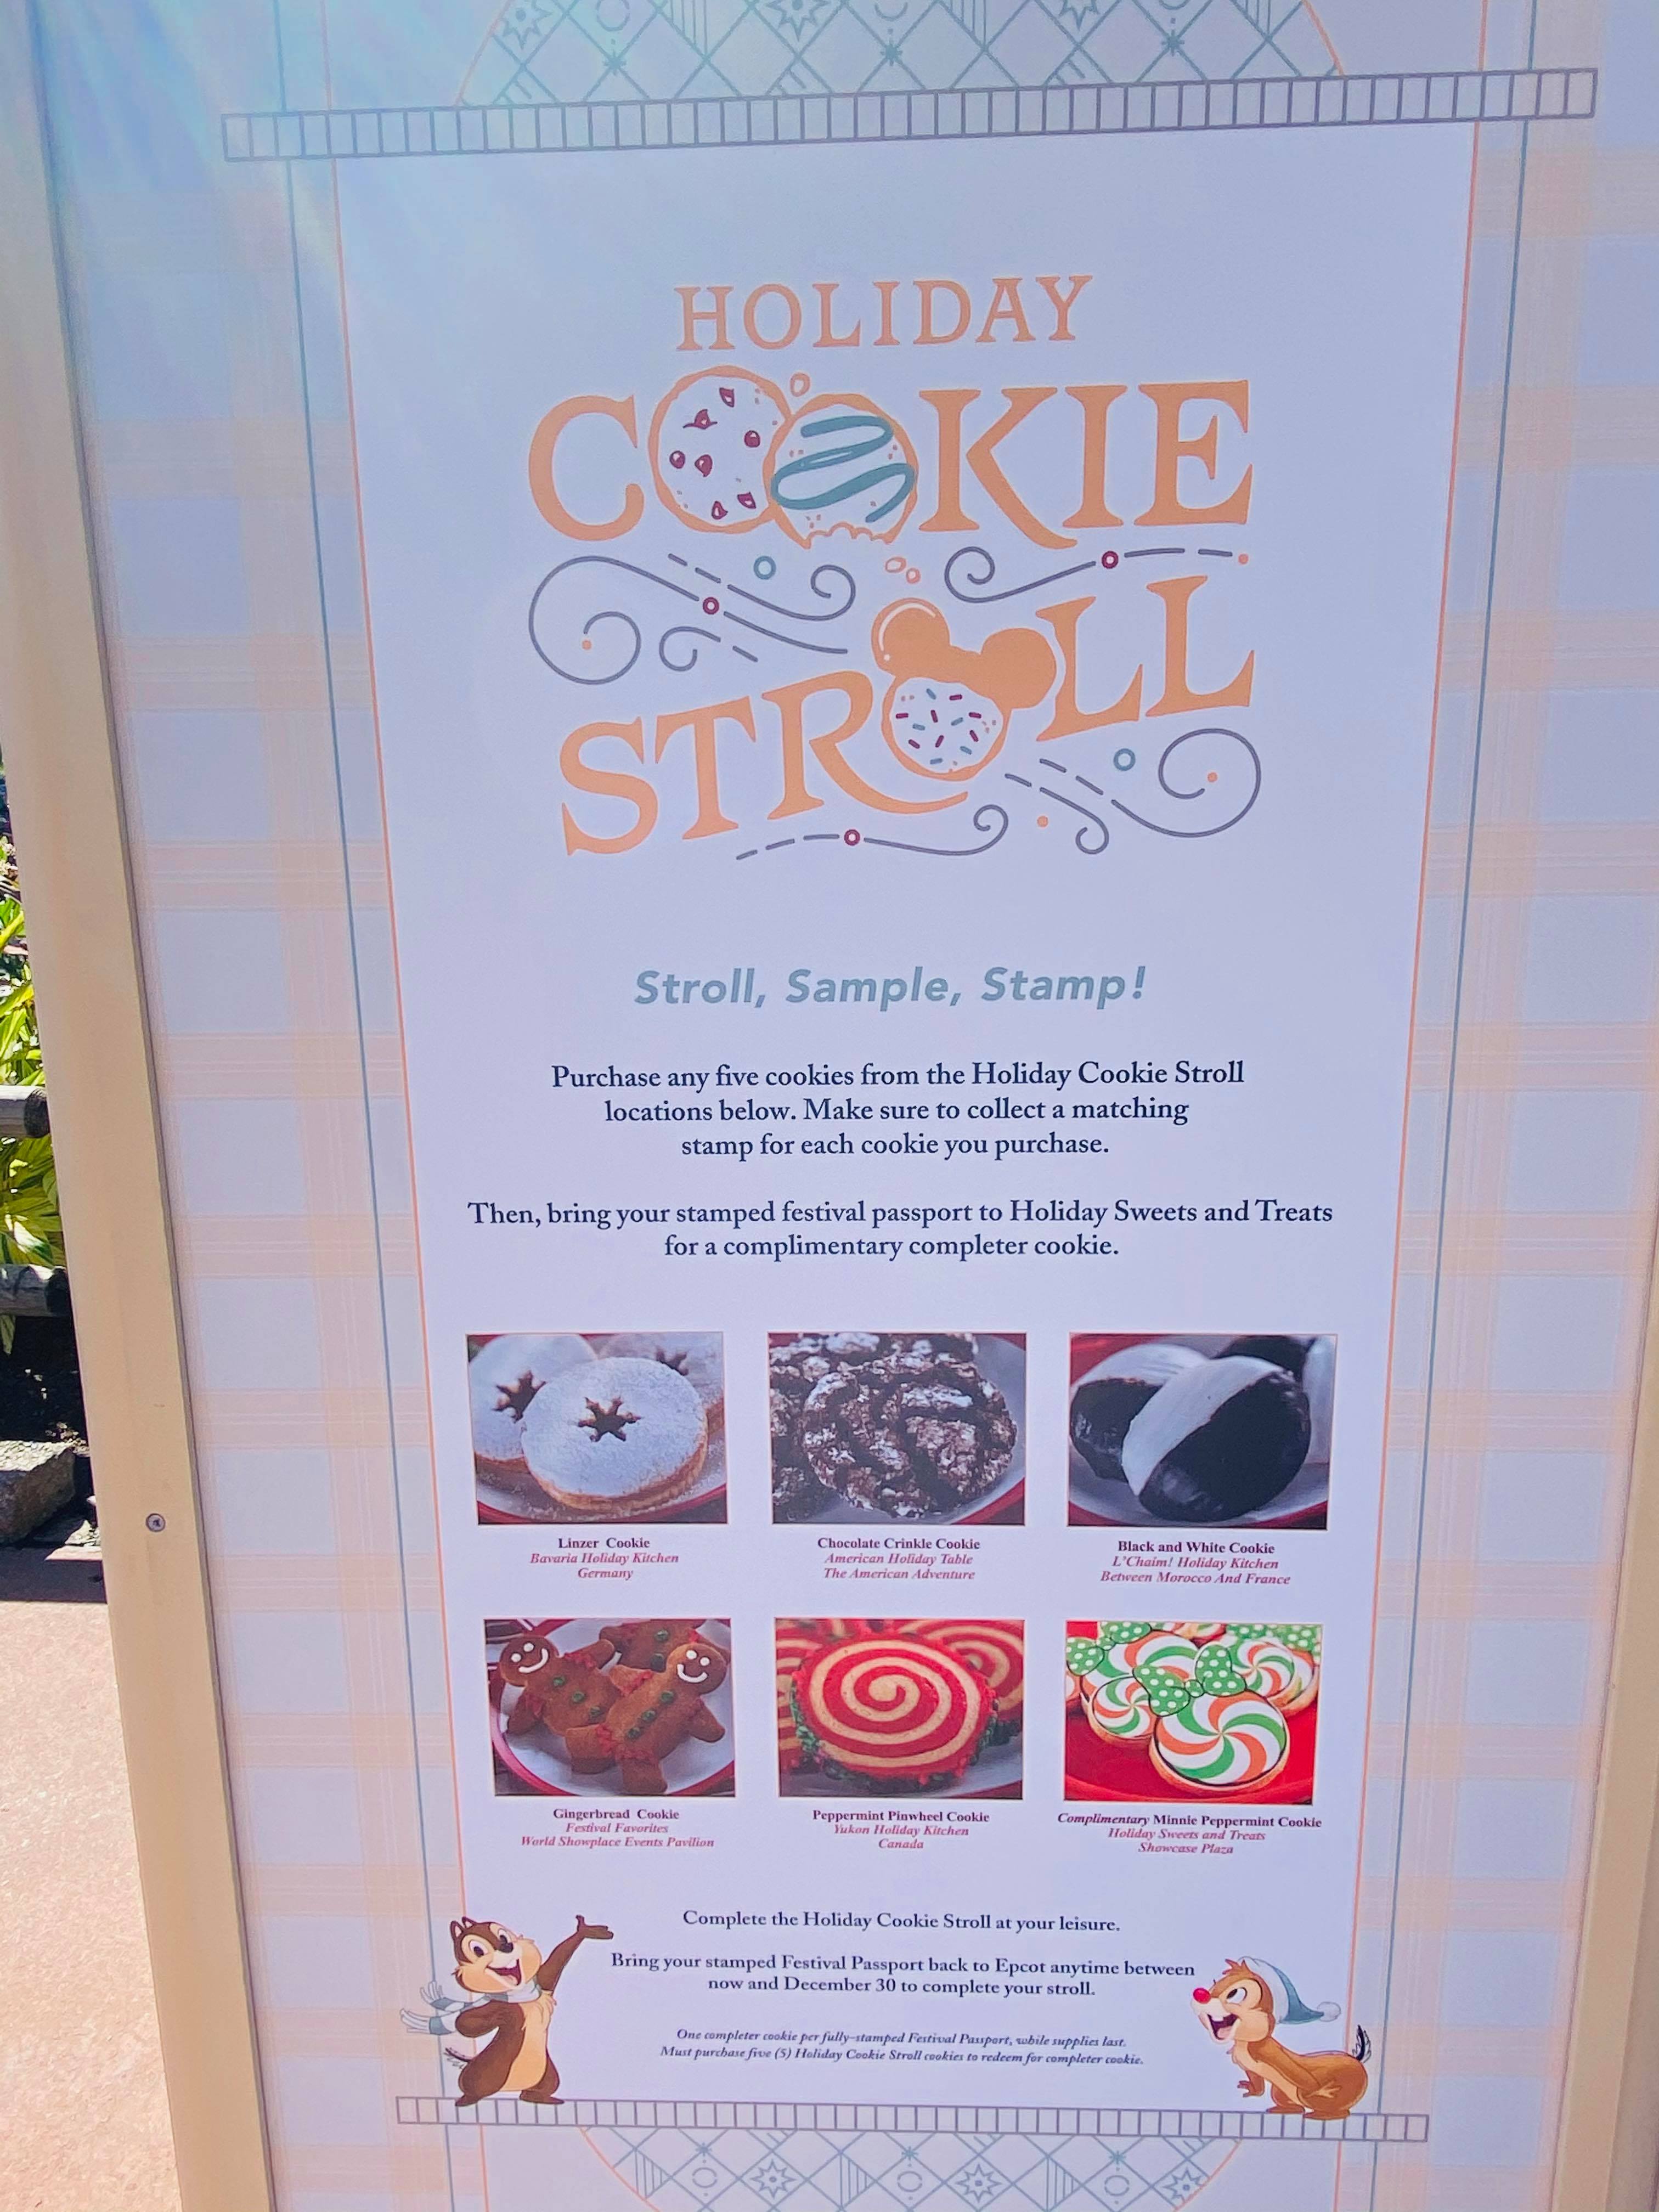 Holiday Cookie Stroll is Back AT Epcot for the Festival of the Holidays